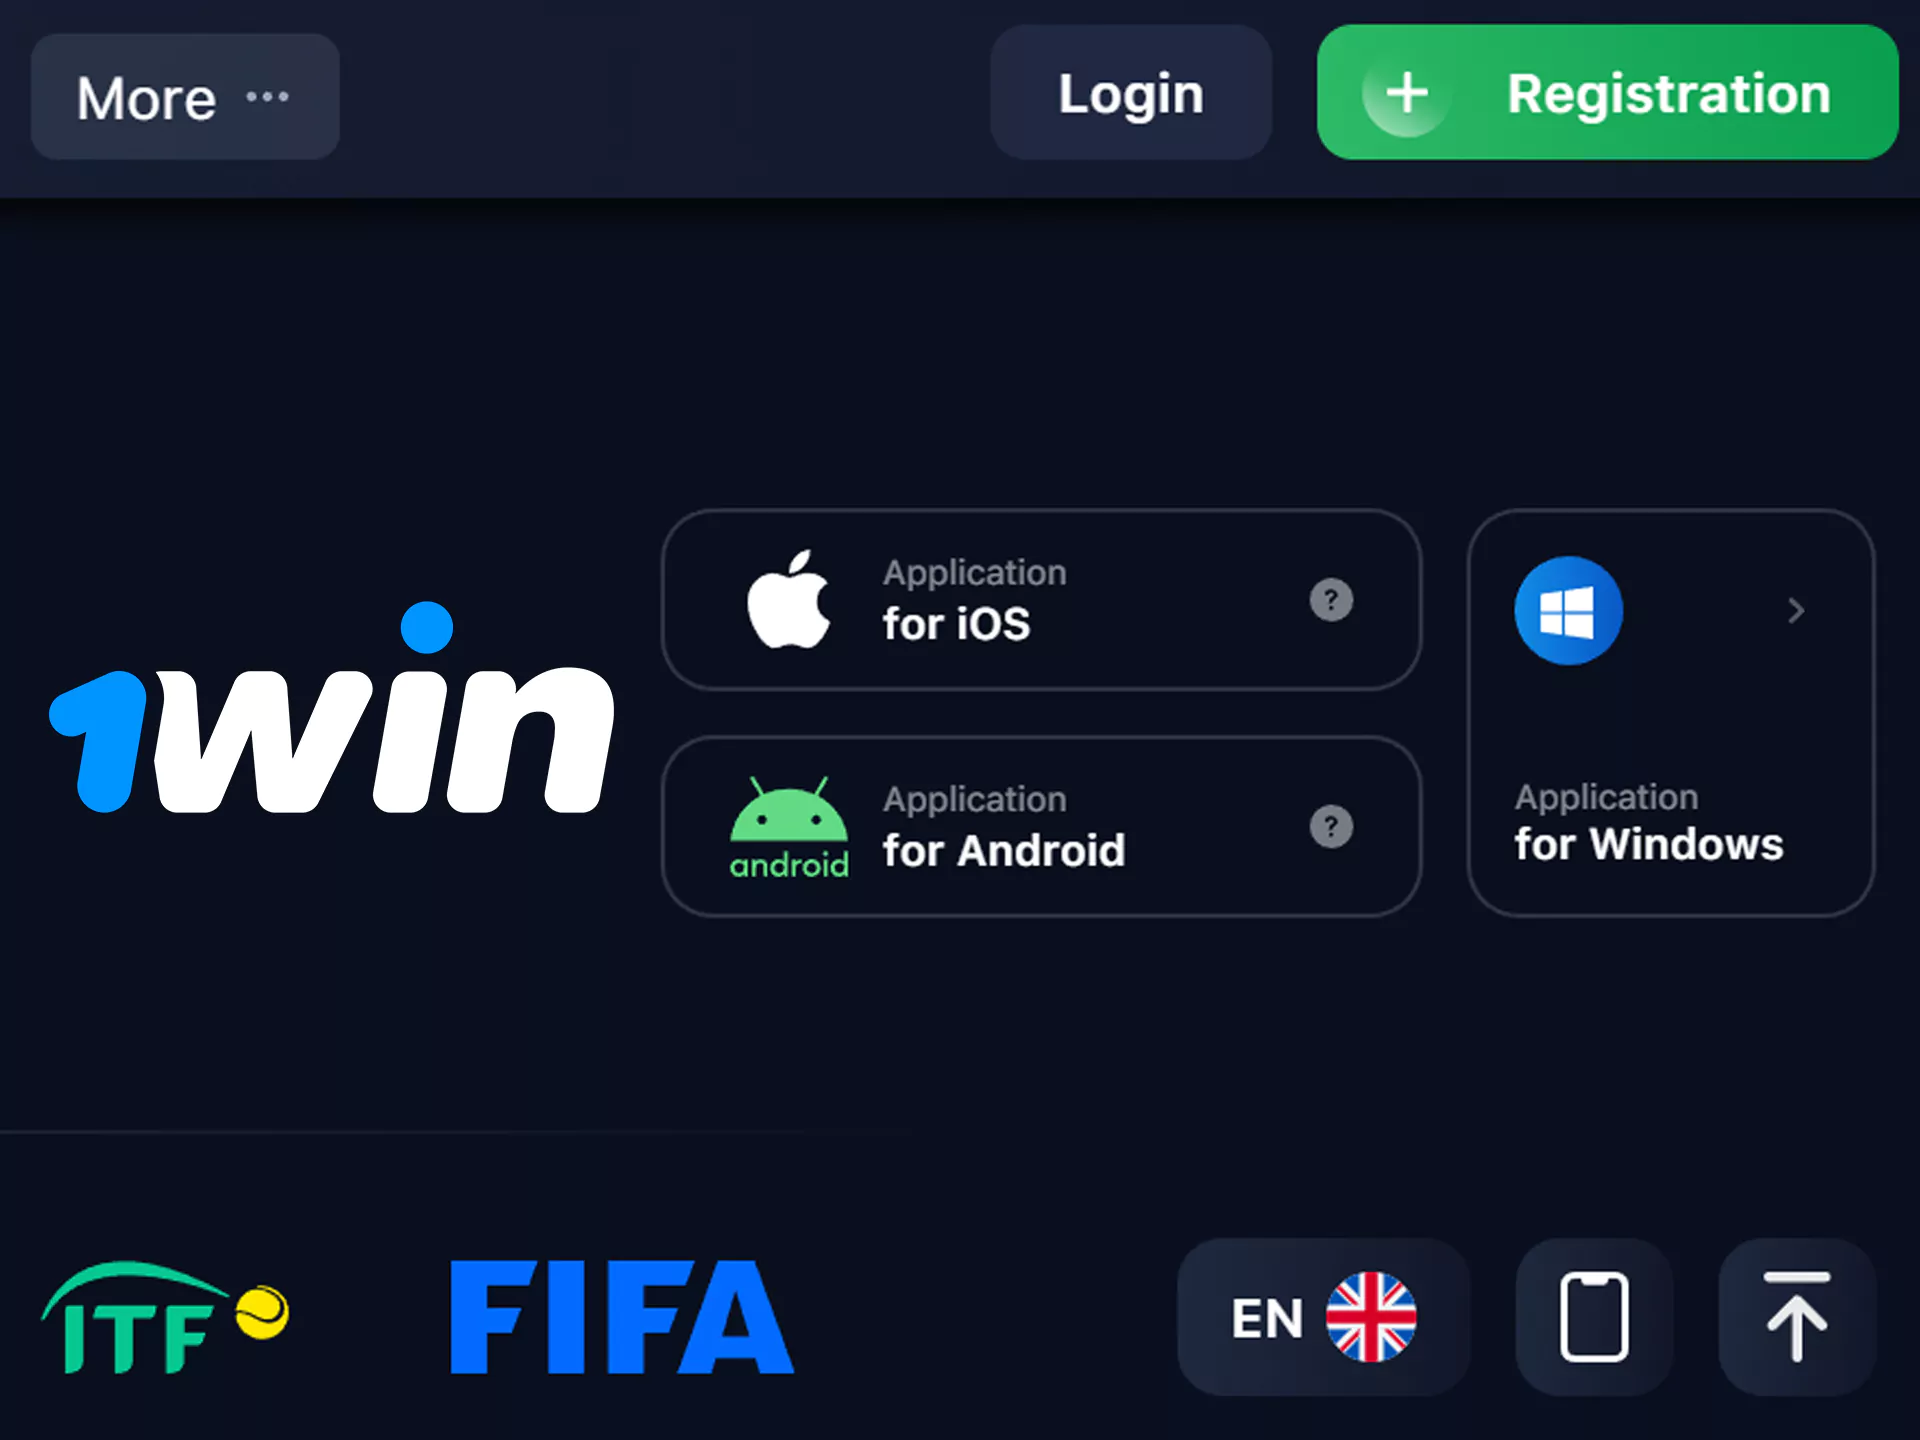 Check for the 1win app for your device.